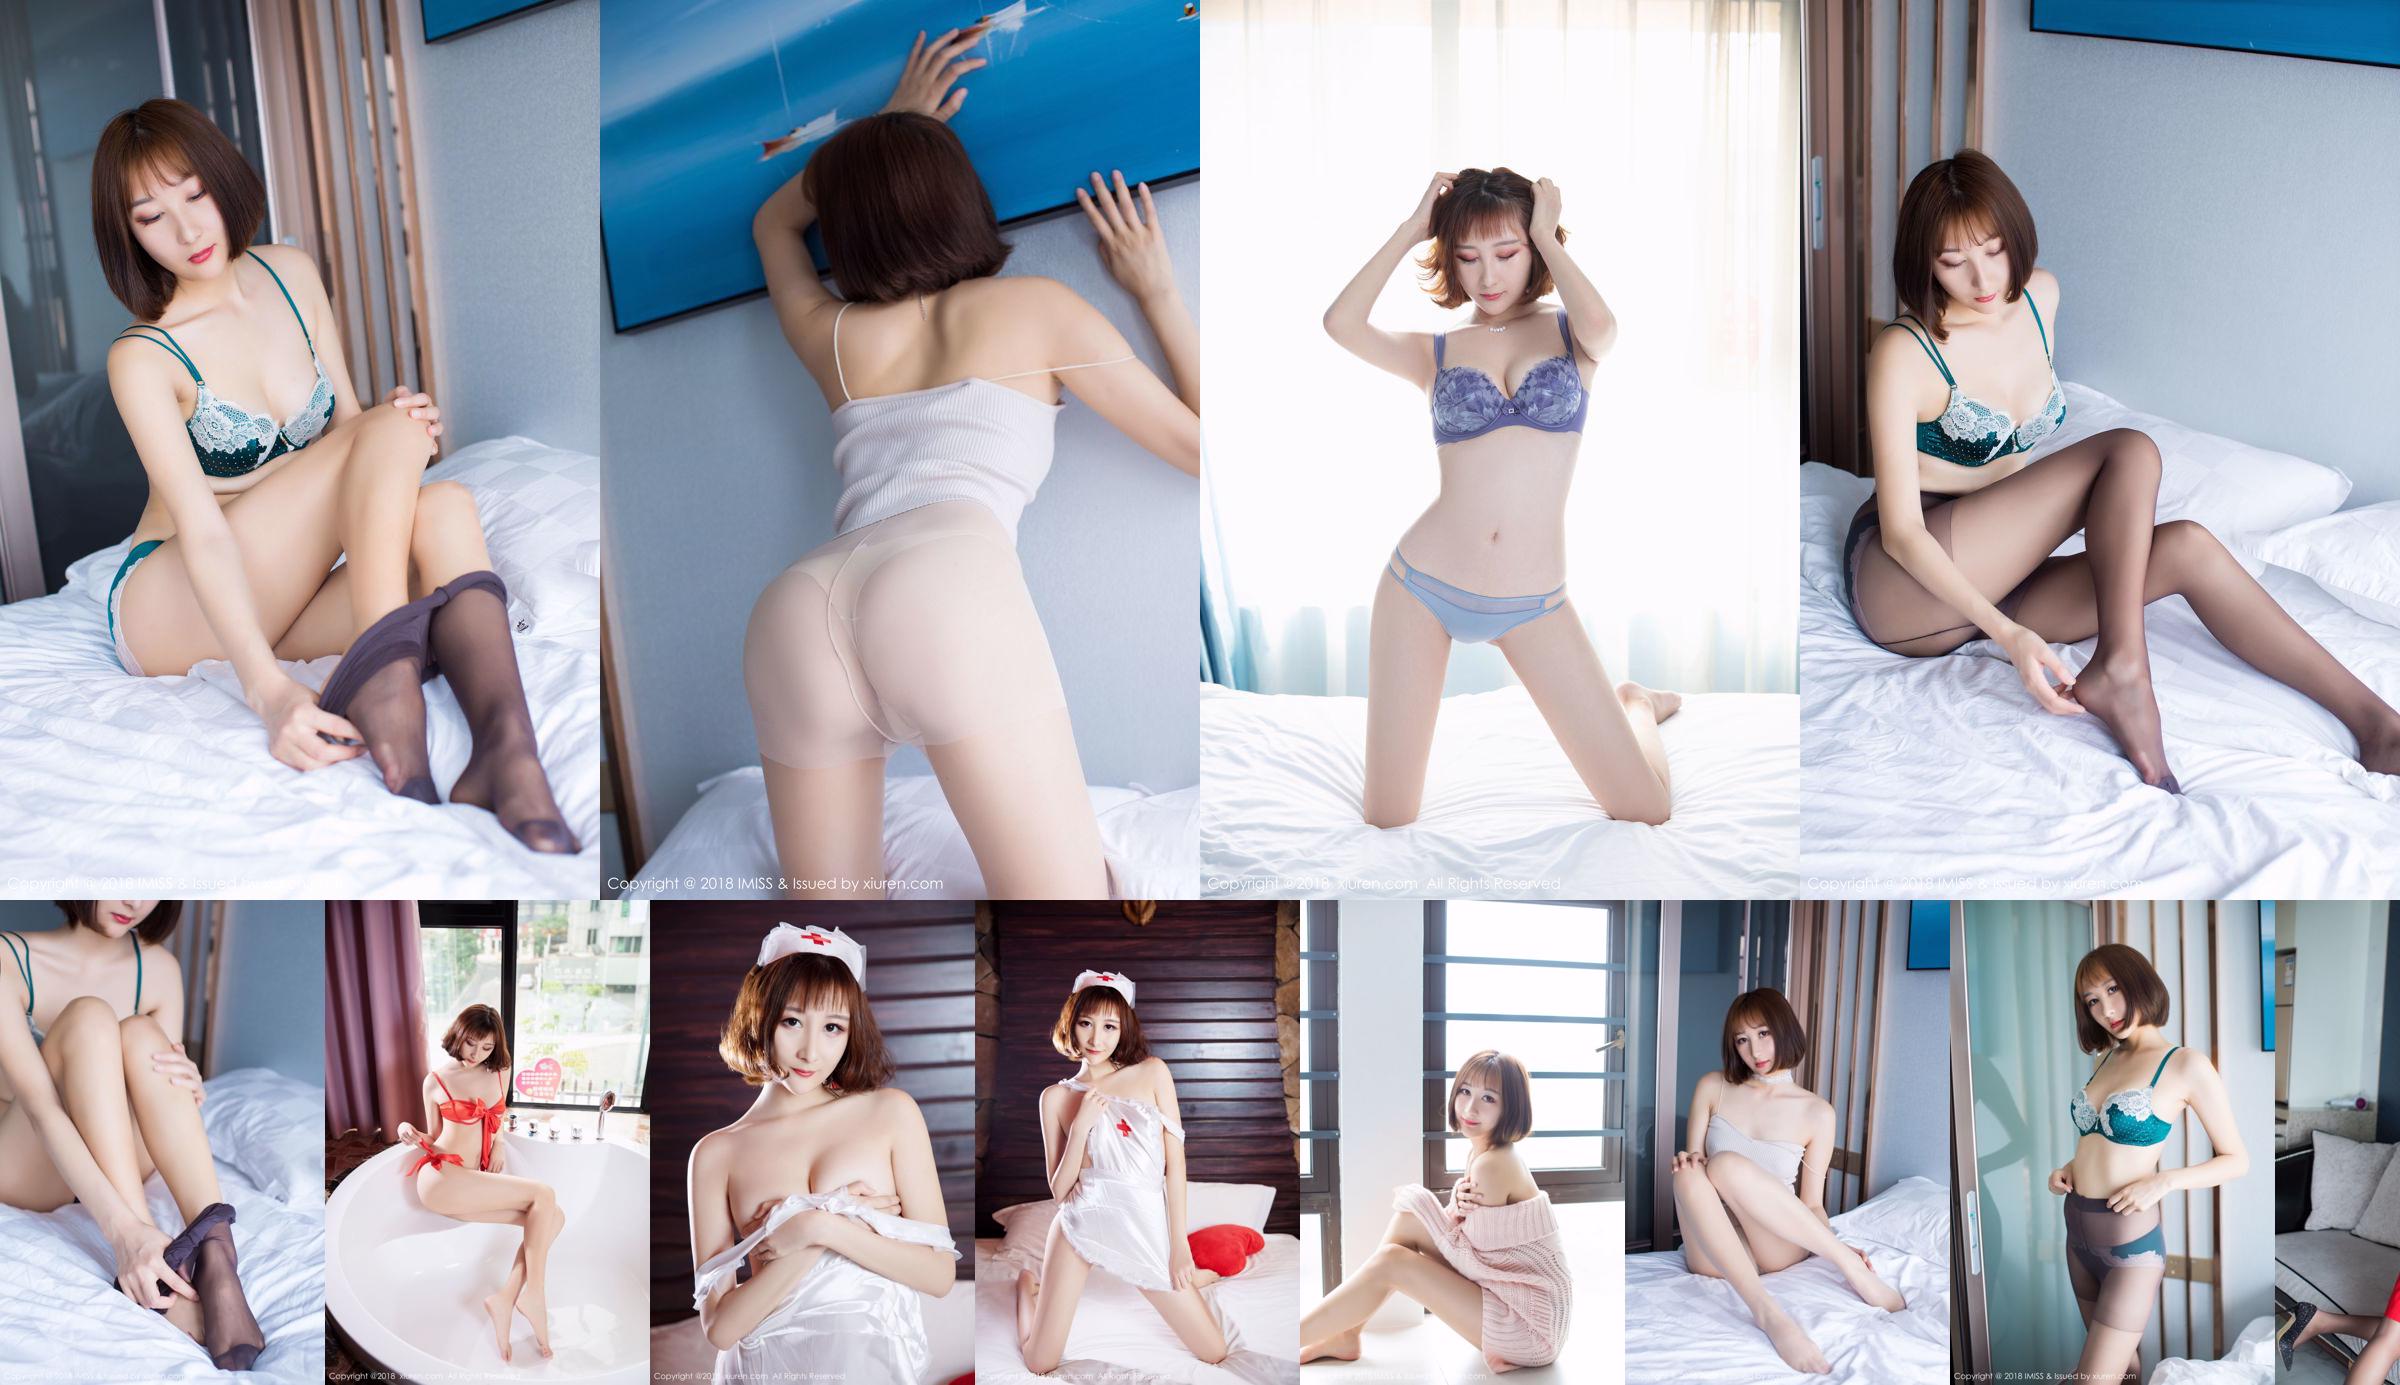 Model @九尾Ivy- "The Ultimate Private Charm" [秀人XIUREN] No.1046 No.bb778f Page 1